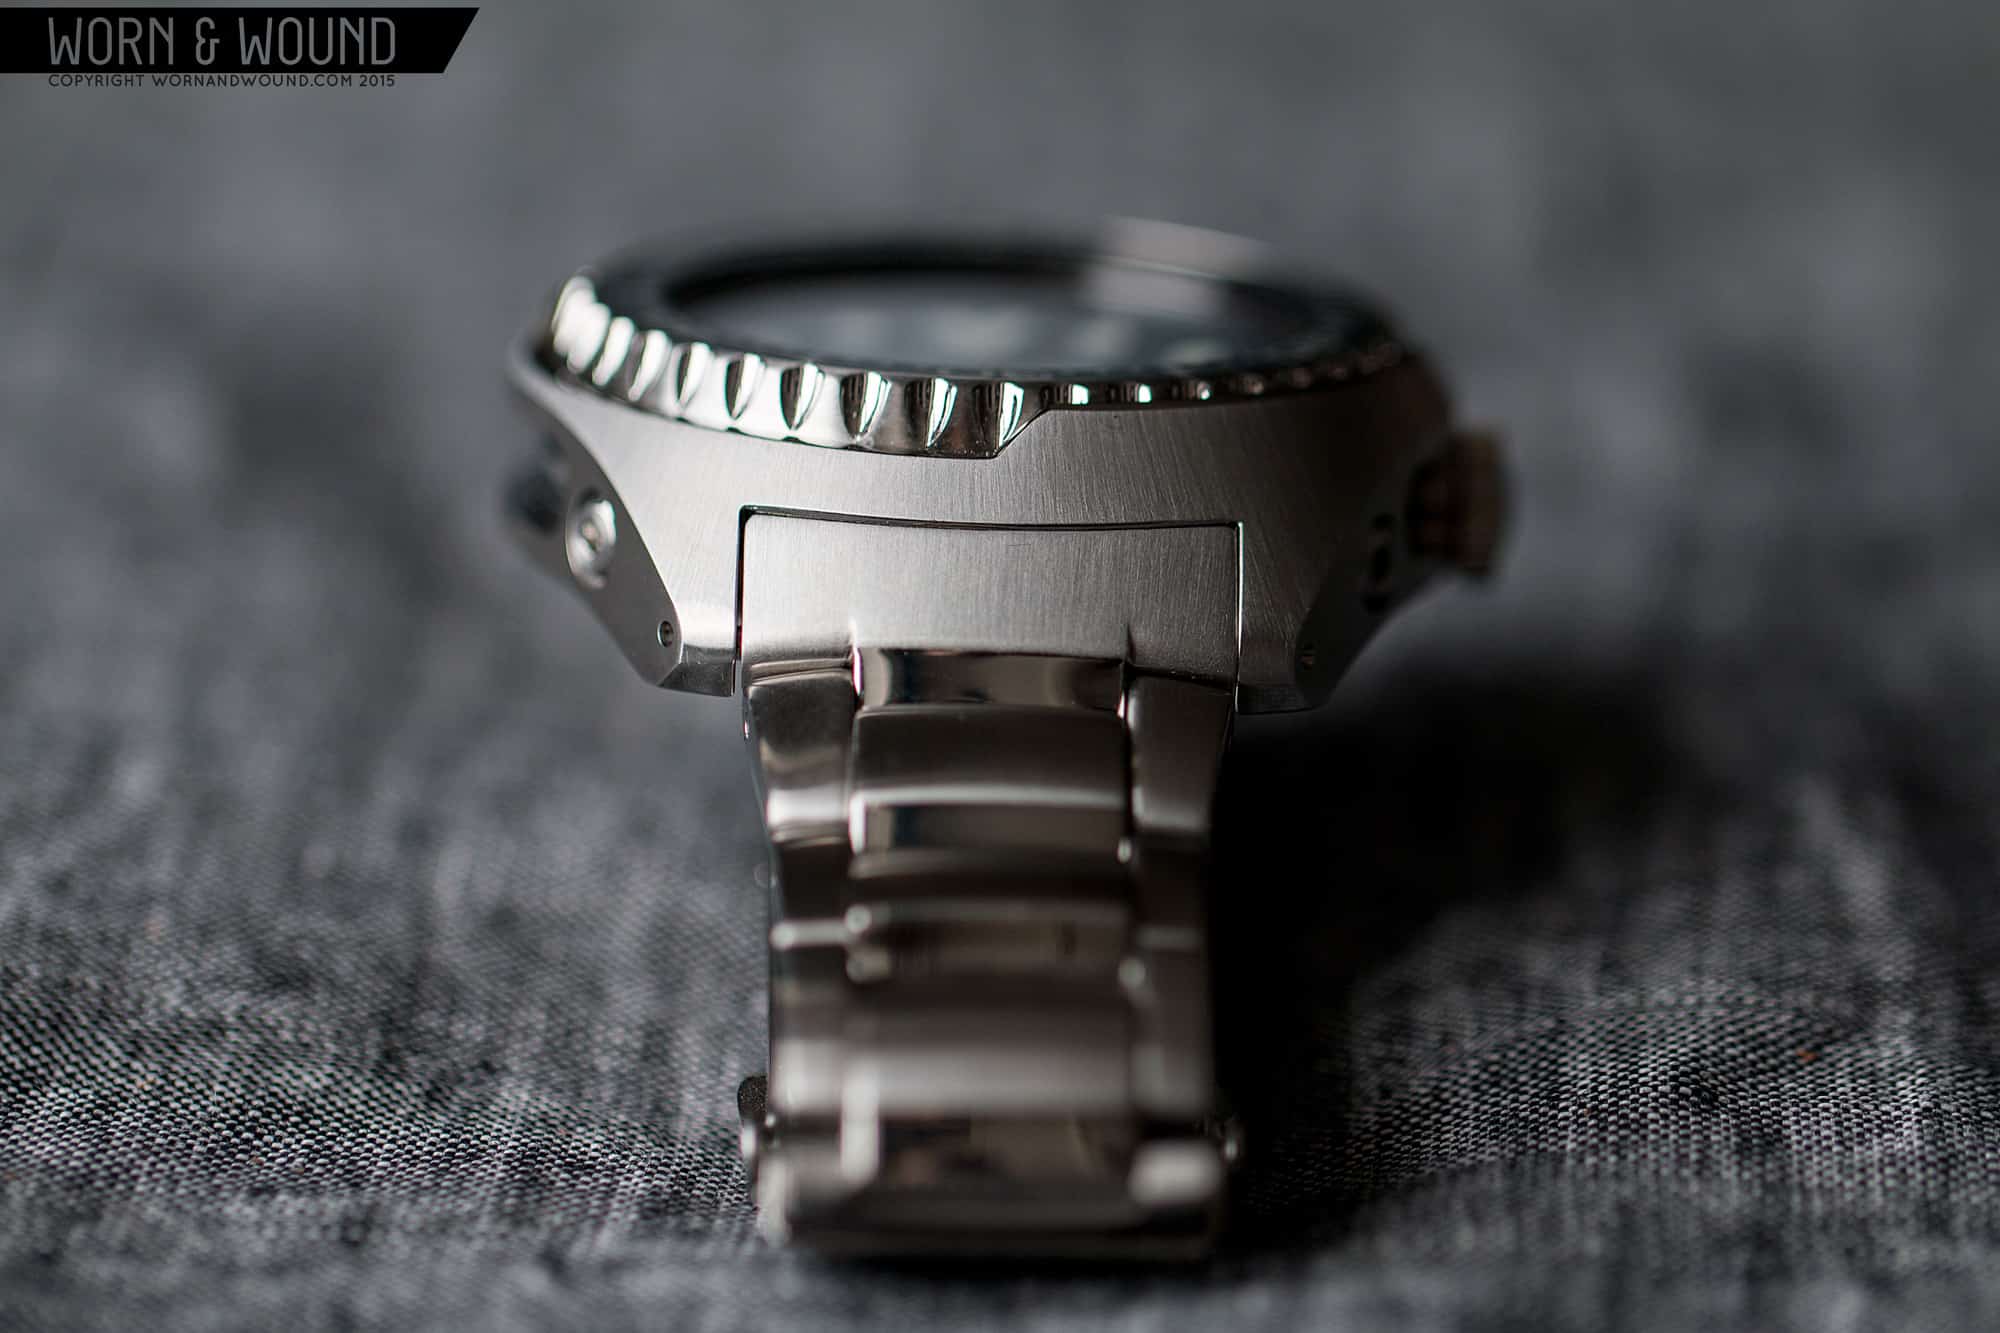 Ithaca Lige Skuffelse Seiko Prospex Kinetic GMT SUN019P1 Review - Worn & Wound